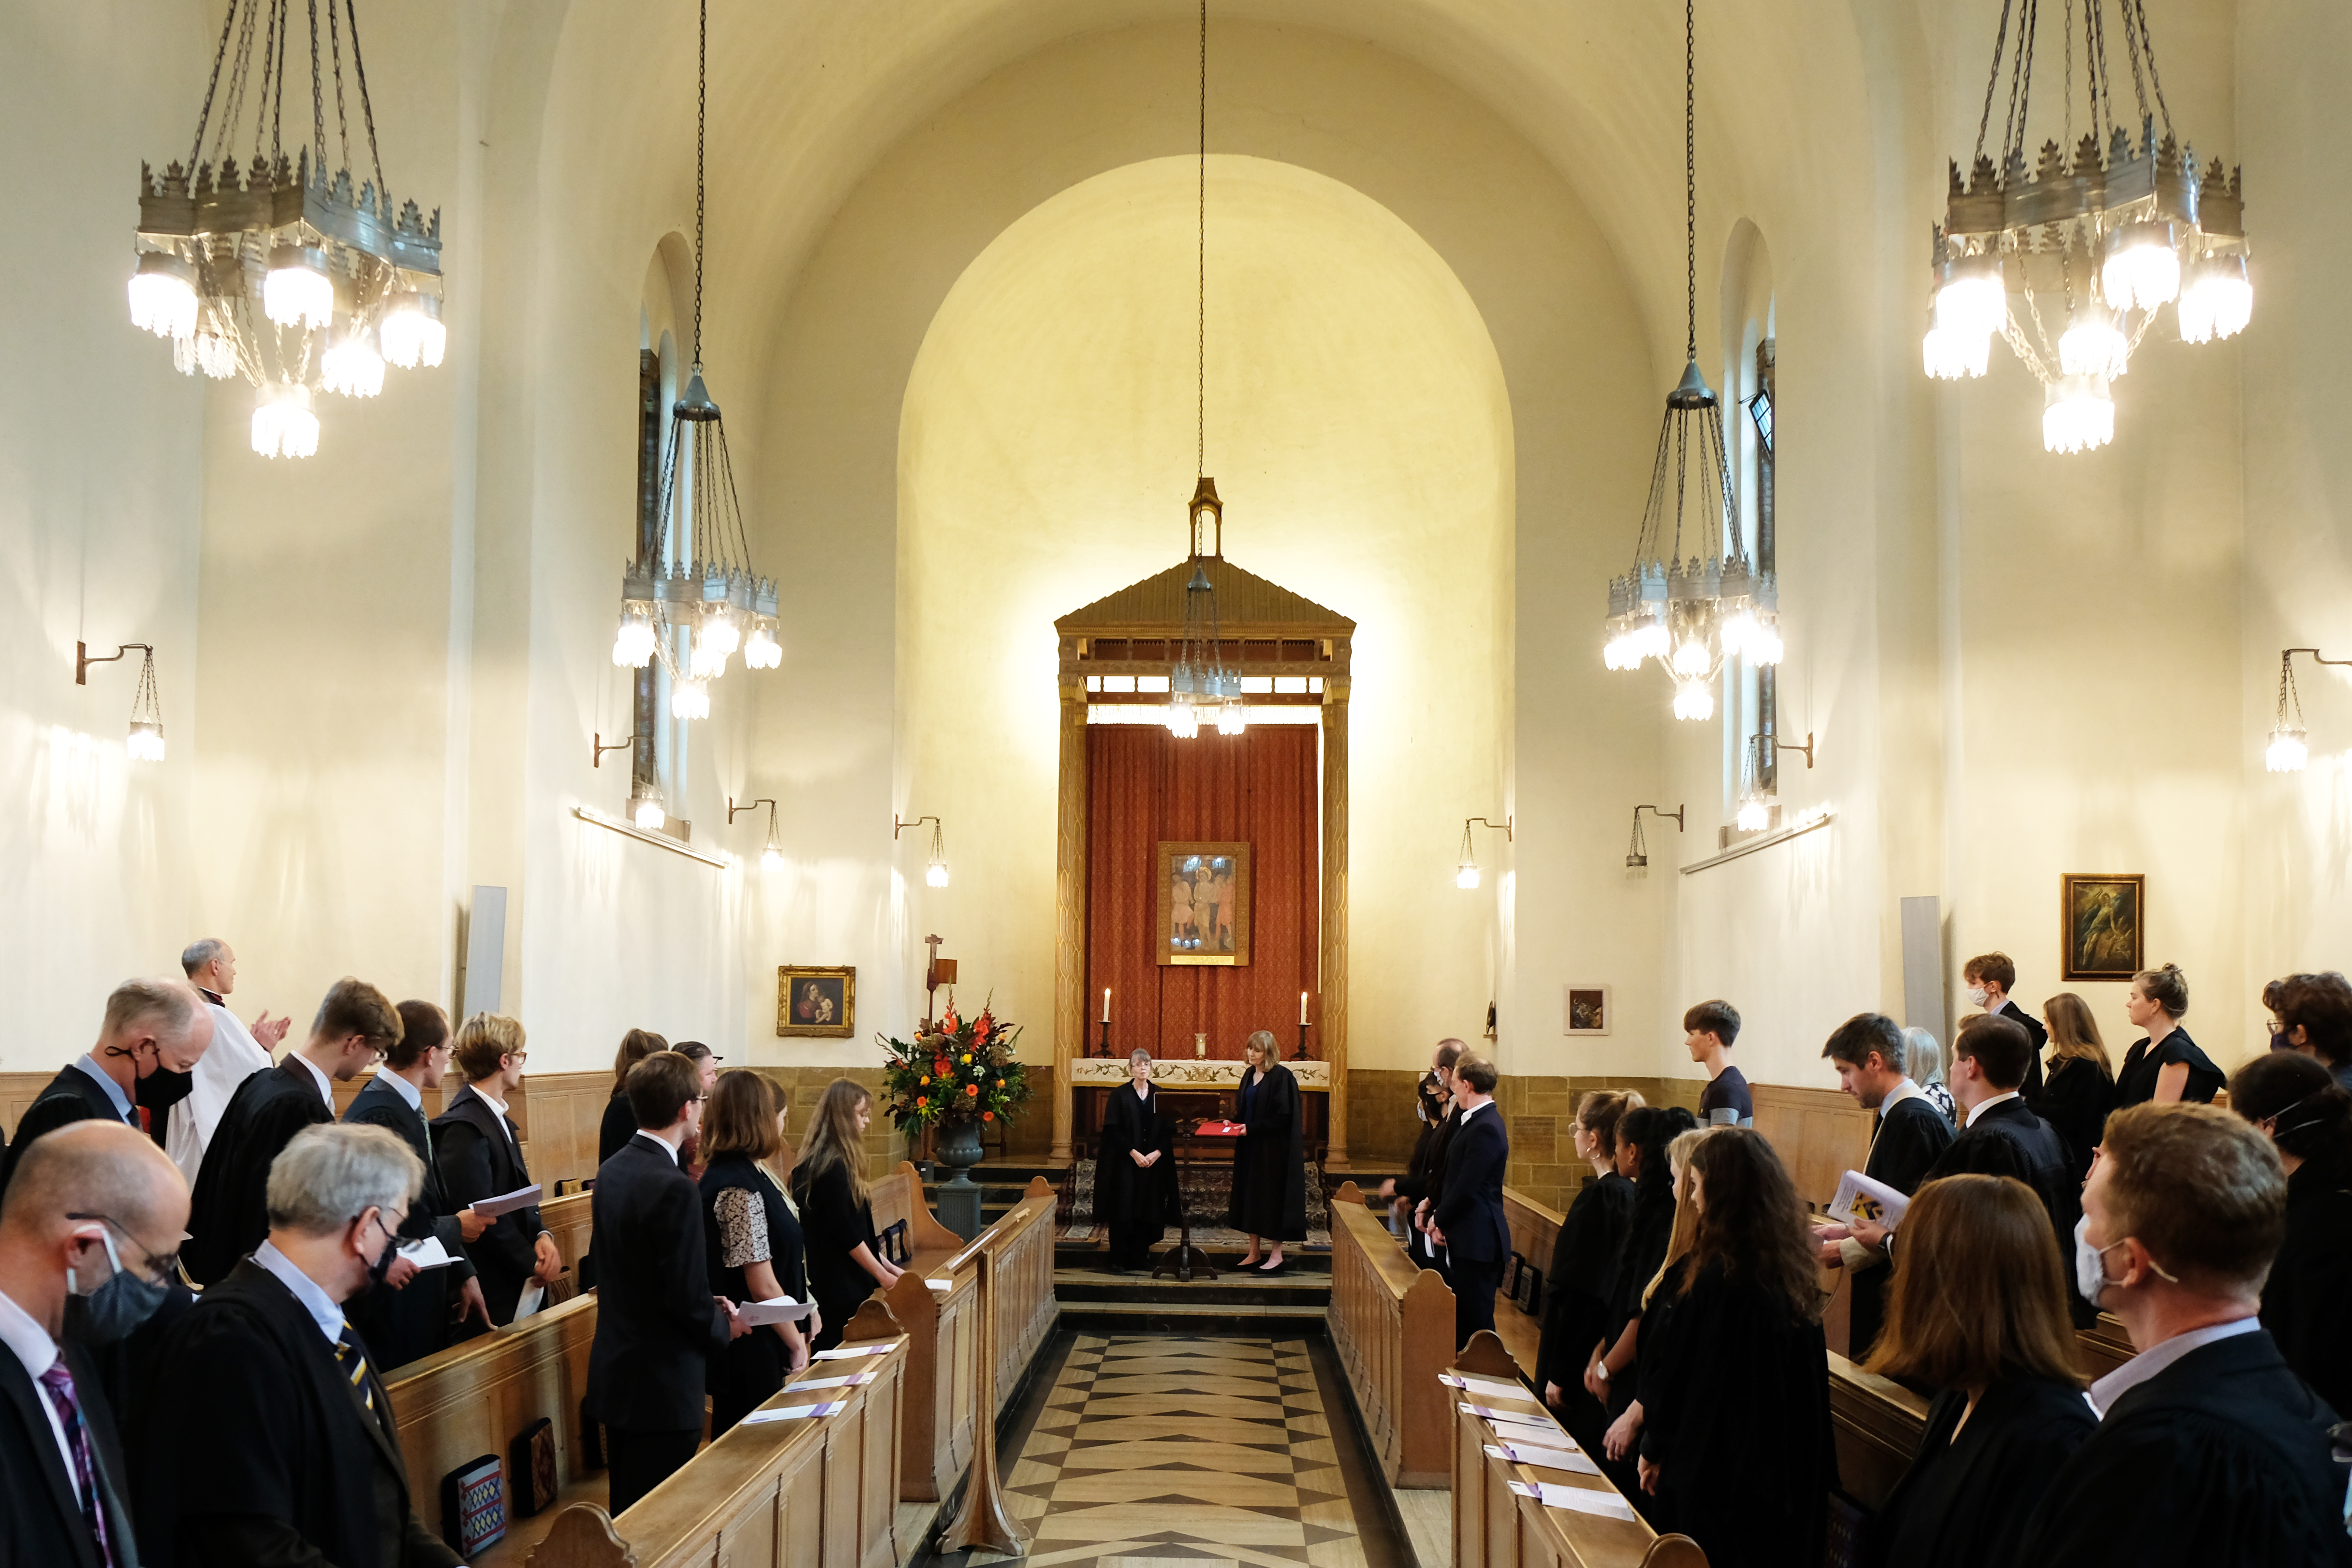 Principal's Inauguration in the LMH Chapel